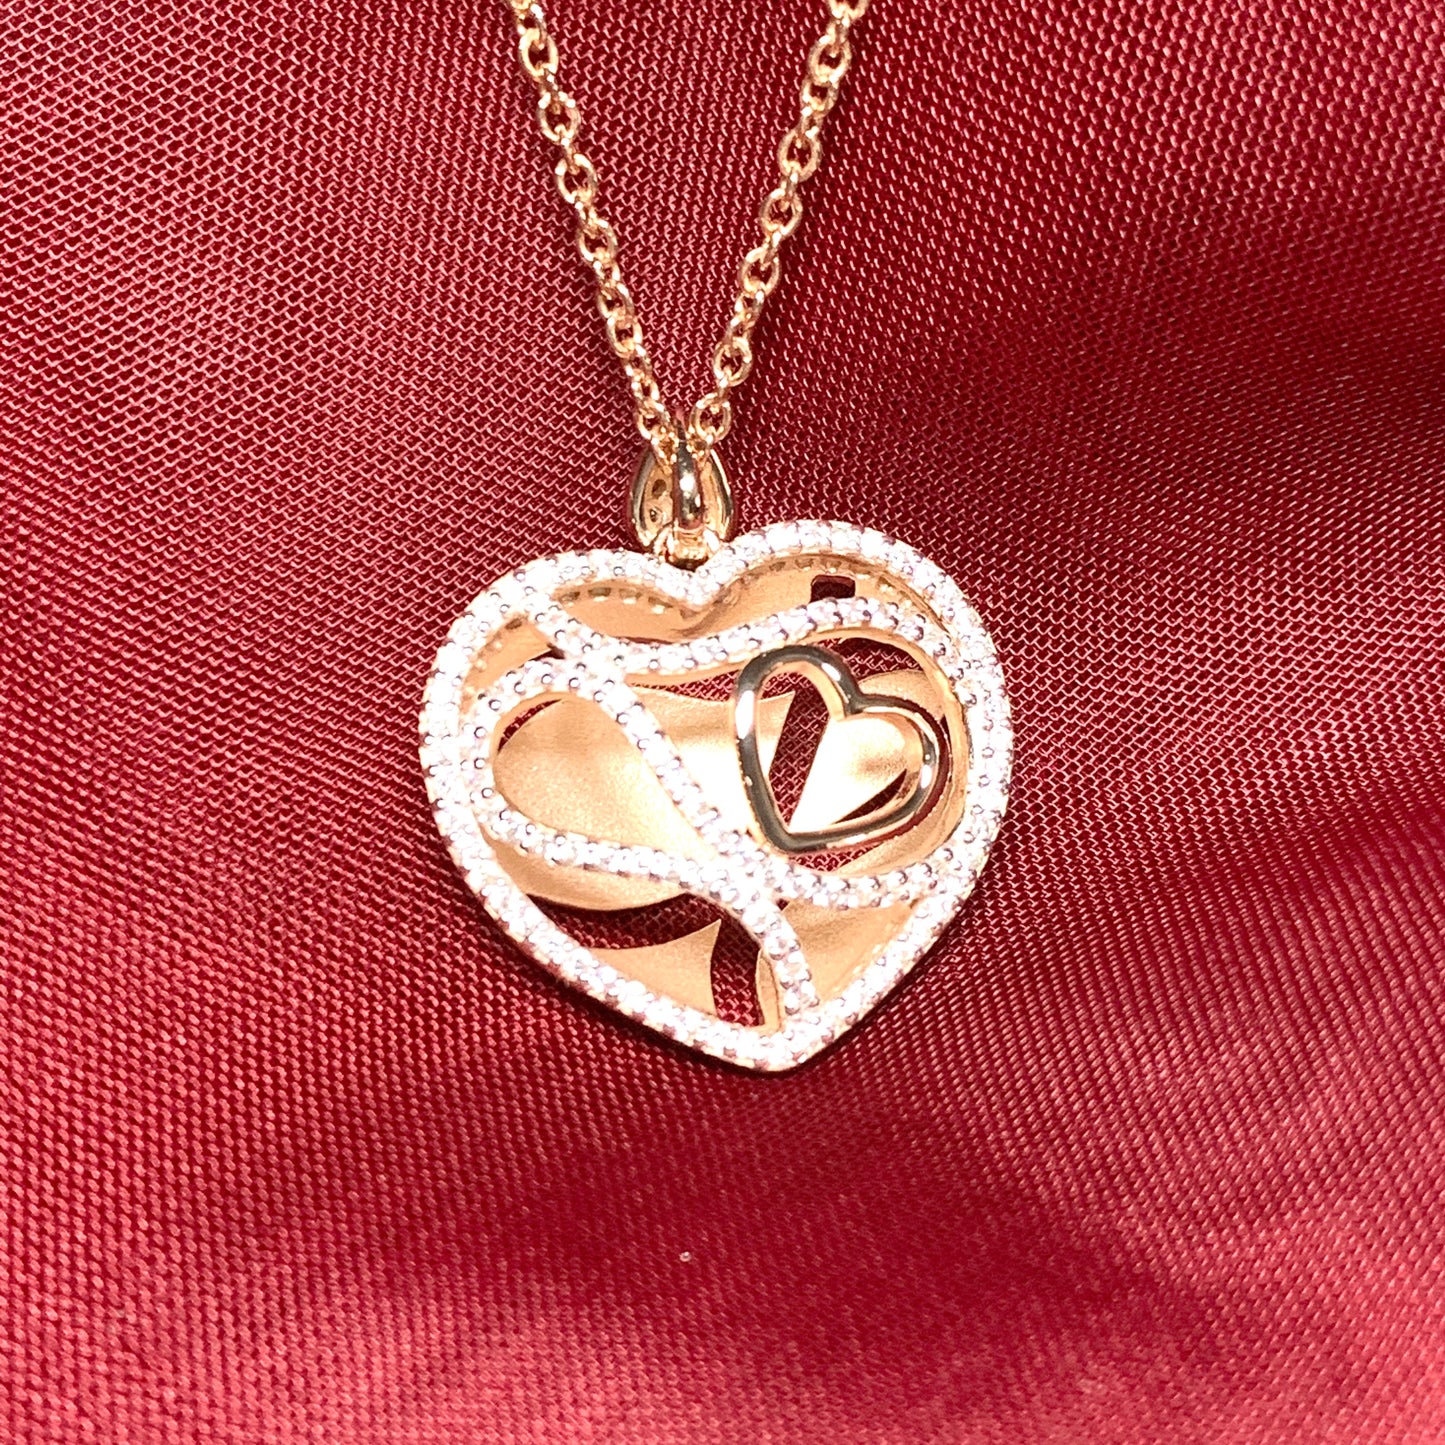 Sterling silver cubic zirconia heart necklace with rose gold giltSterling silver cubic zirconia heart necklace with rose gold gilt